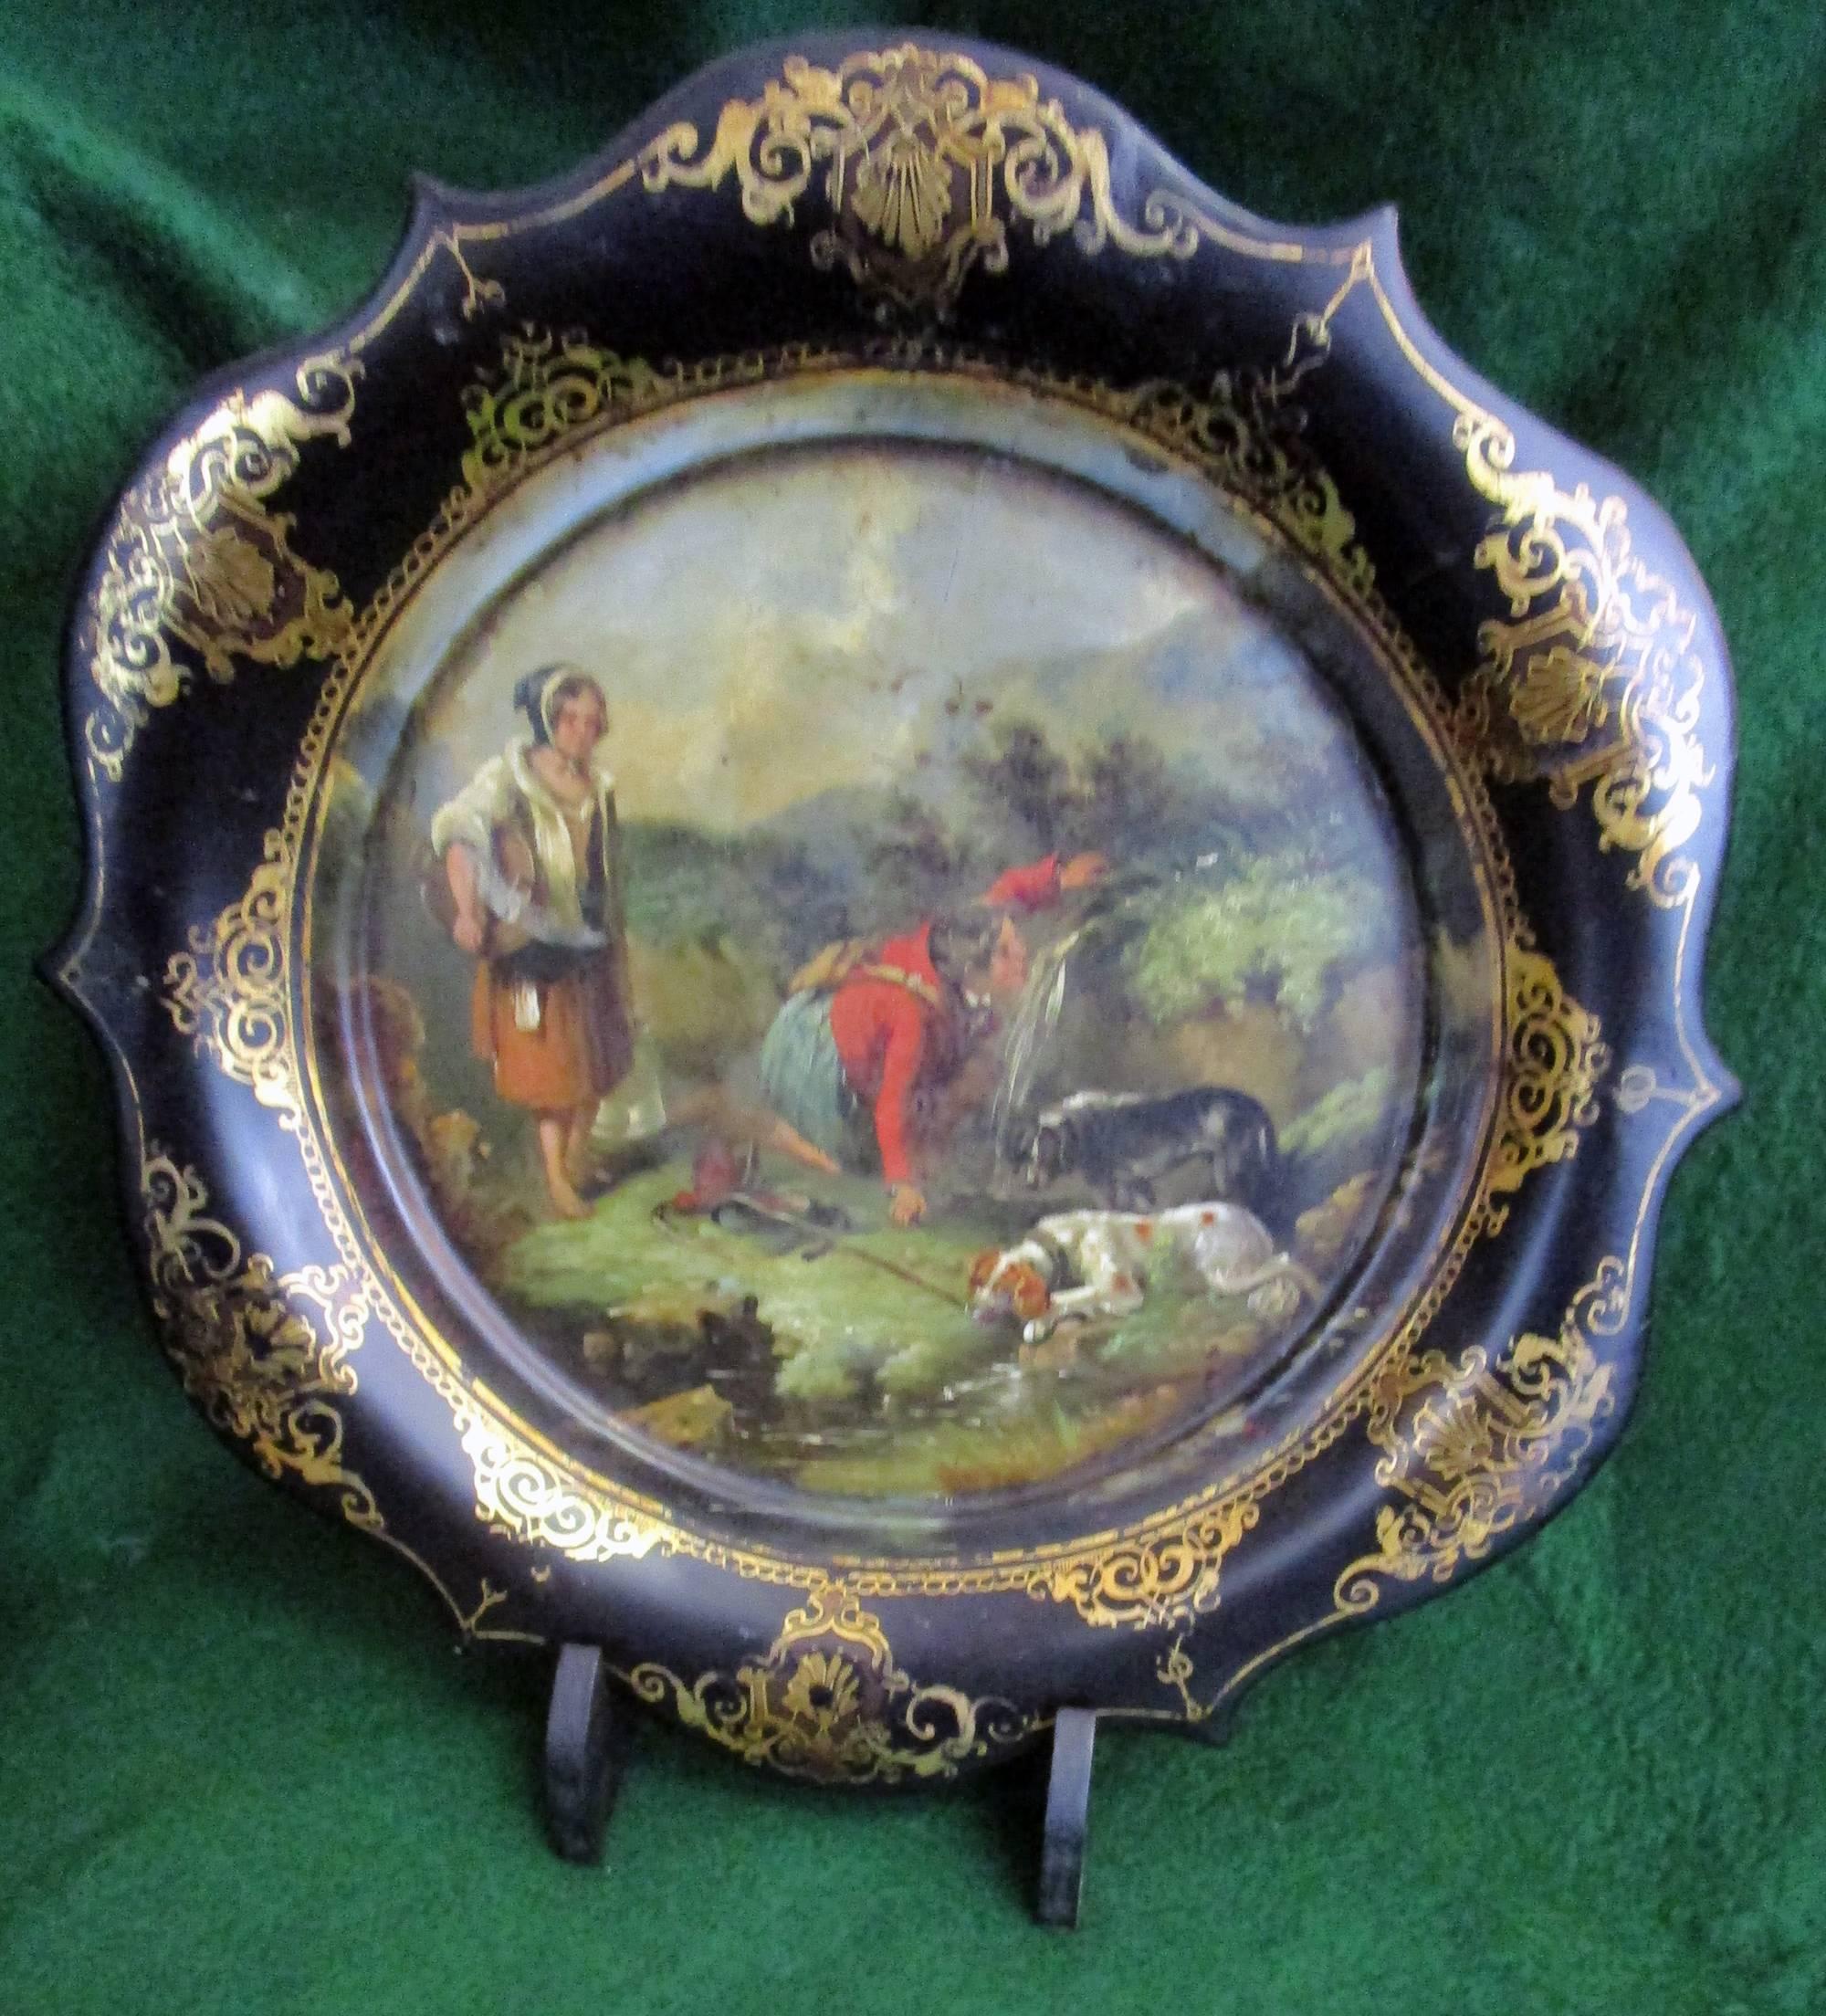 Colorfully painted plate featuring a scalloped edge and made of papier mâché, which was very popular with Victorian England in the mid-1800s. Not only accessories but large furniture pieces were made of Papier Mâché and was a favorite of Queen